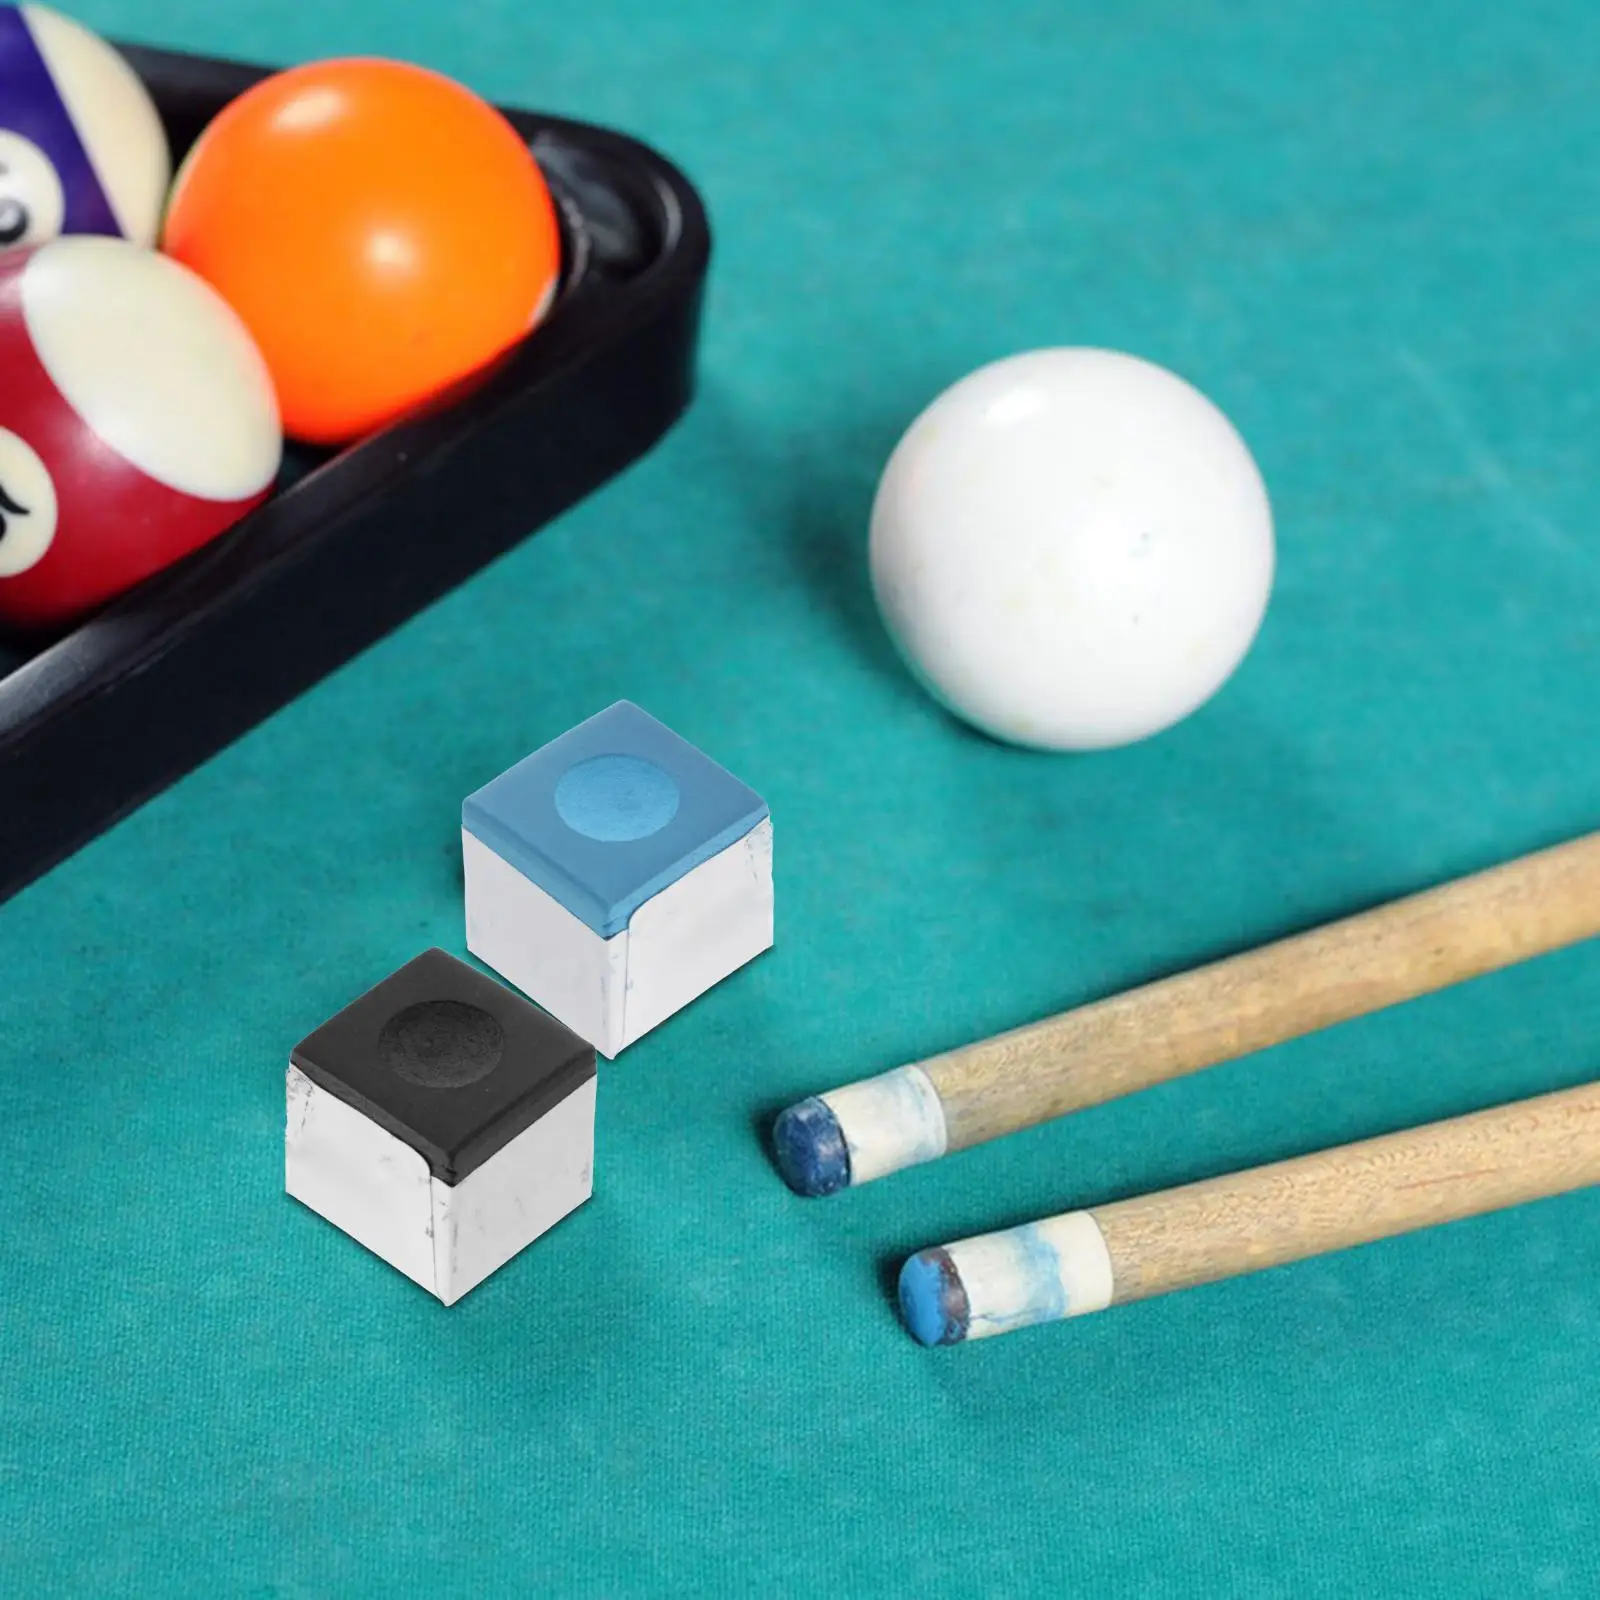 12 Pieces Pool Chalk Cubes Billiard Pool Cue Chalks for Sports Supplies Bars